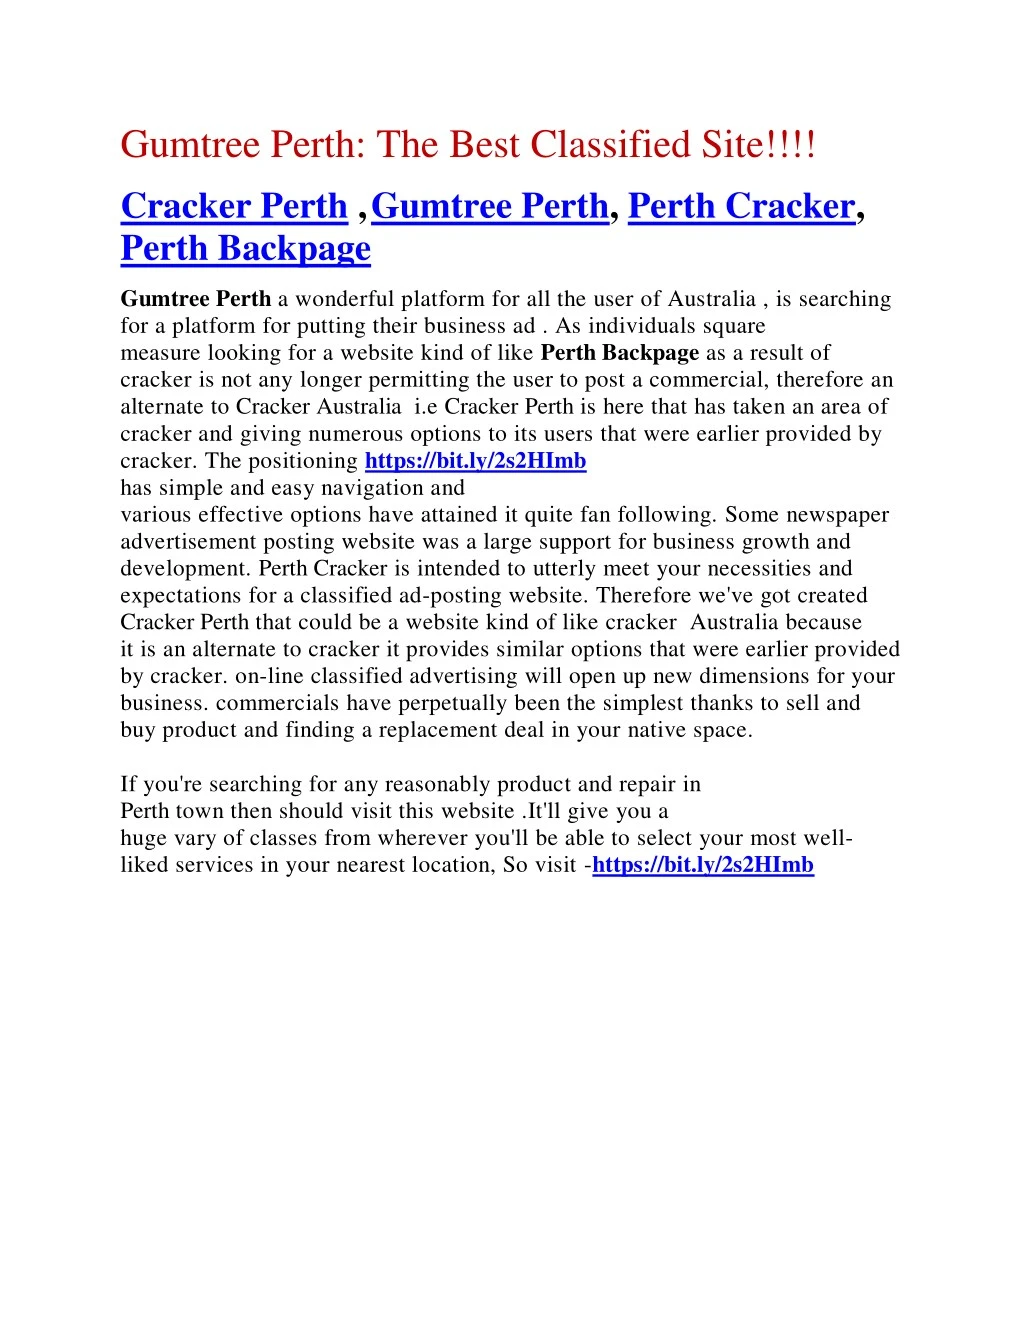 gumtree perth the best classified site cracker